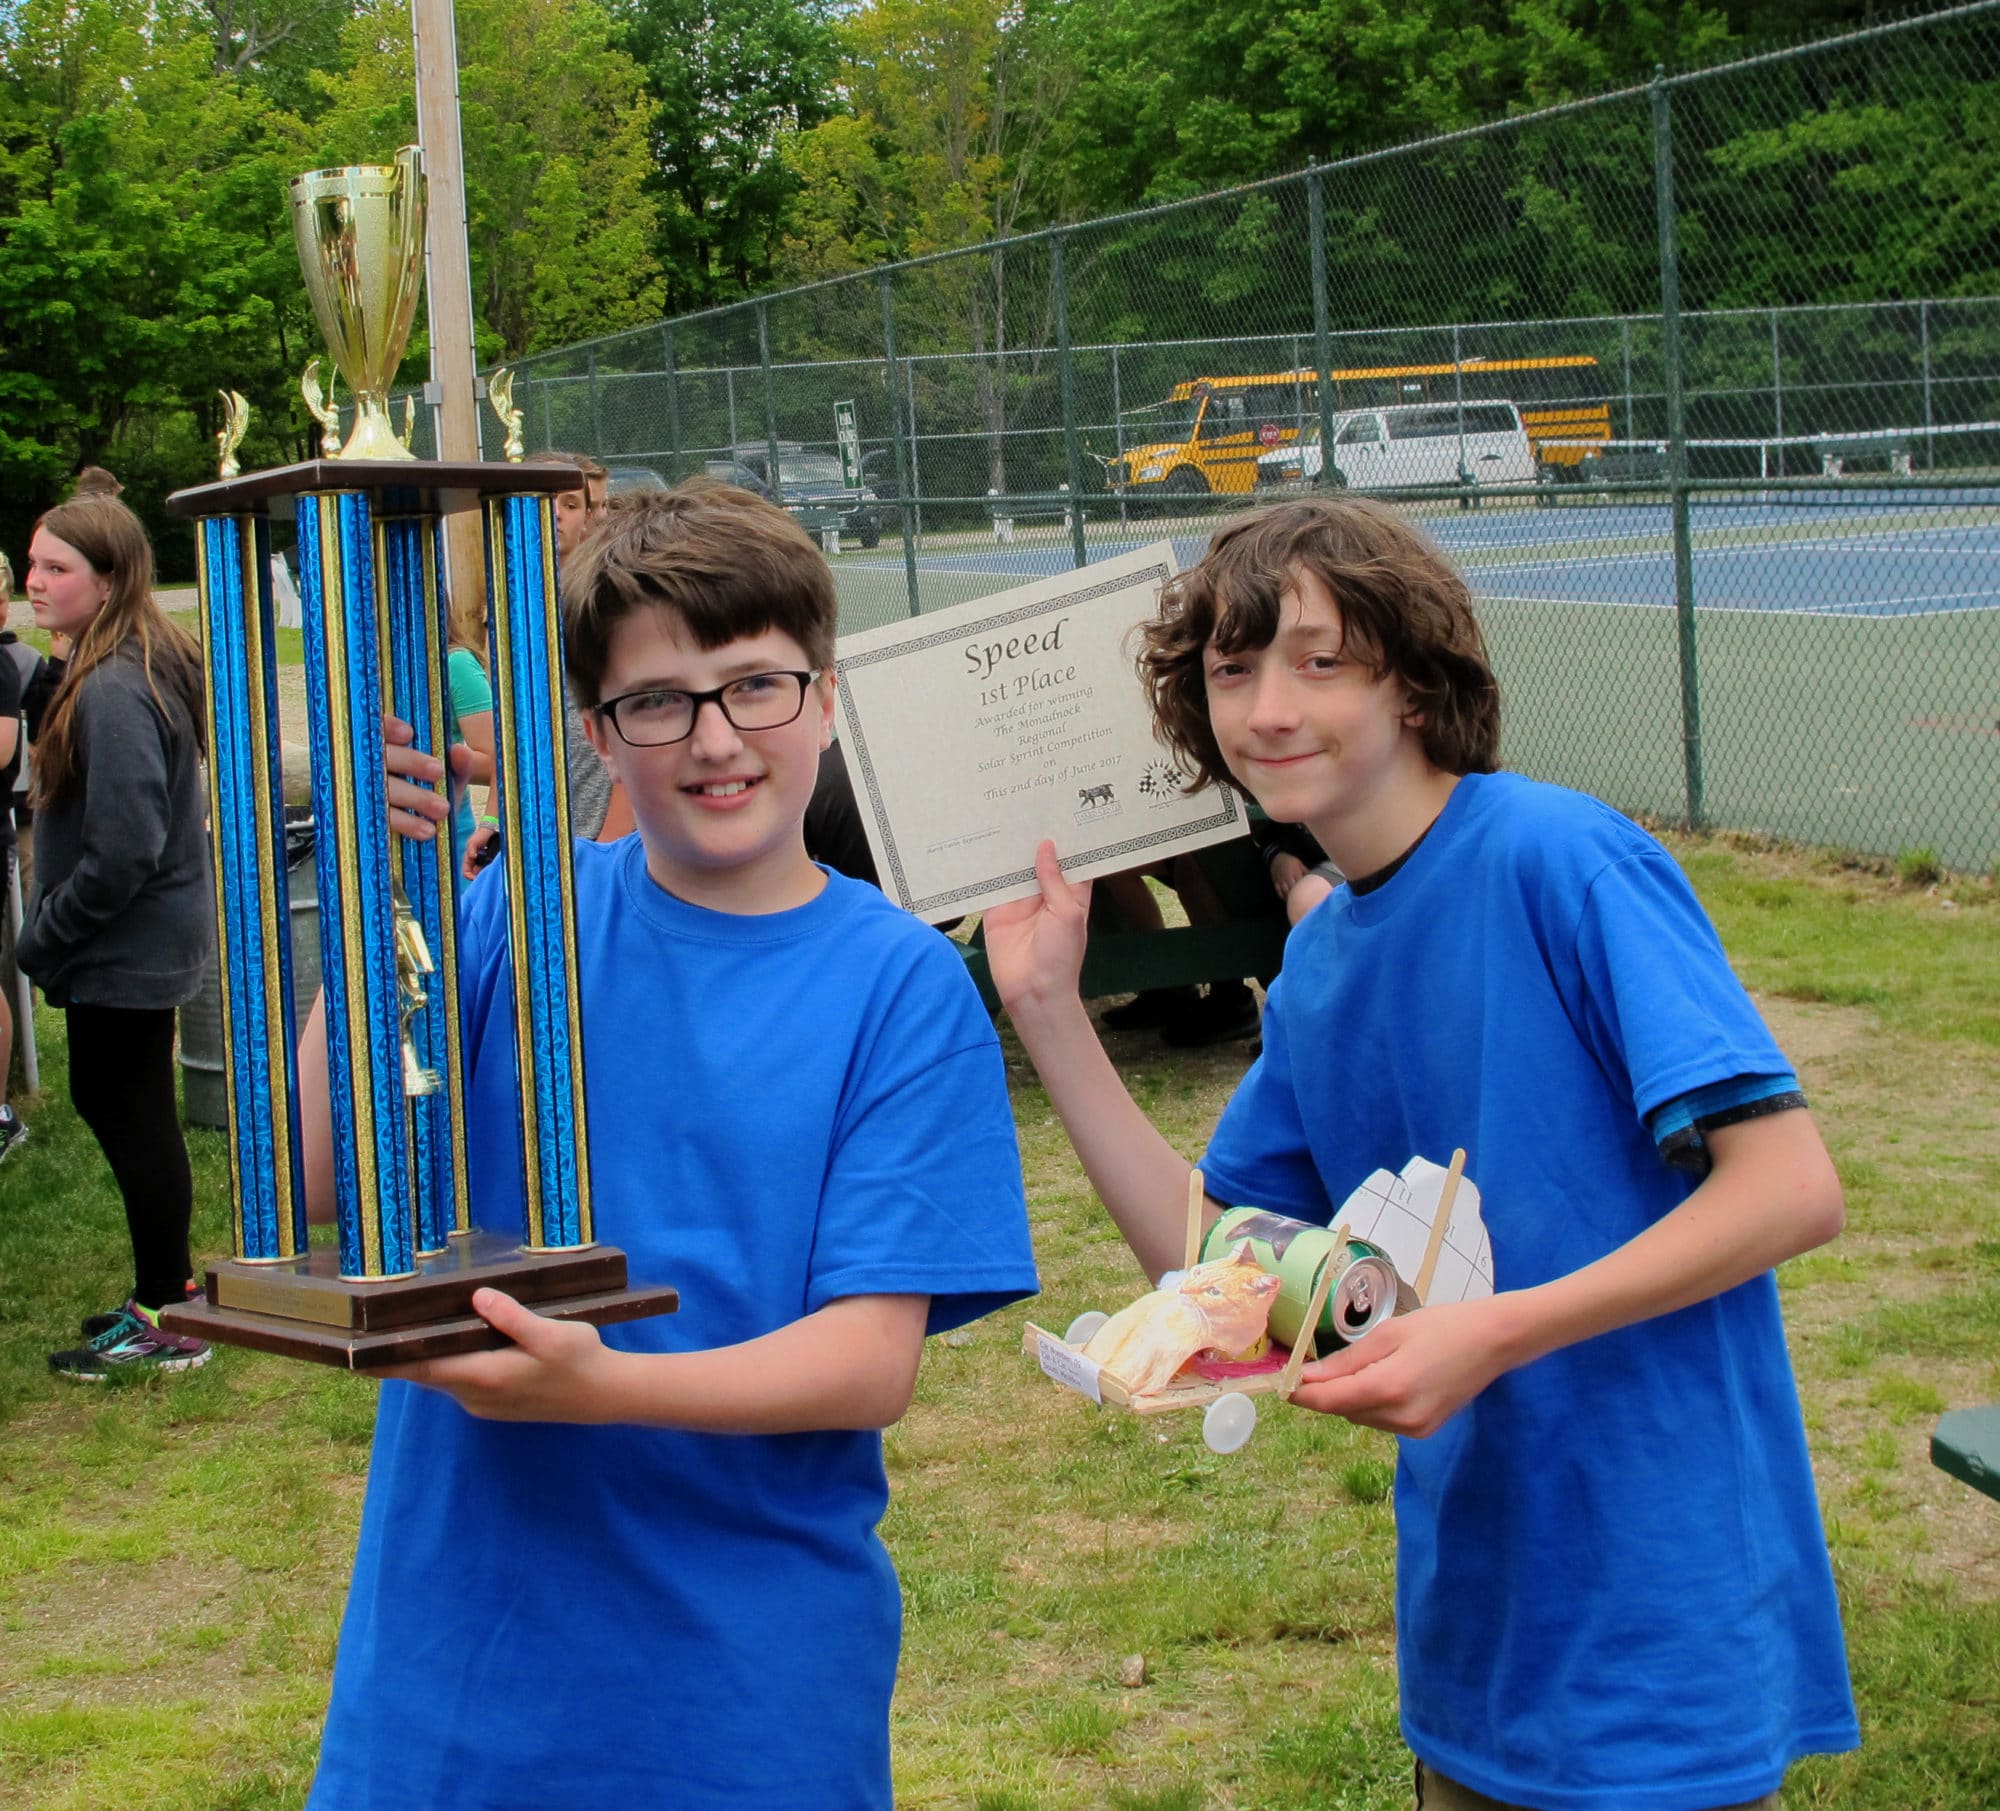 Henry and Tom of South Meadow School with their prize-winning, solar-powered model car, “Cat-a-Lac.”  (photo © Brett Amy Thelen)